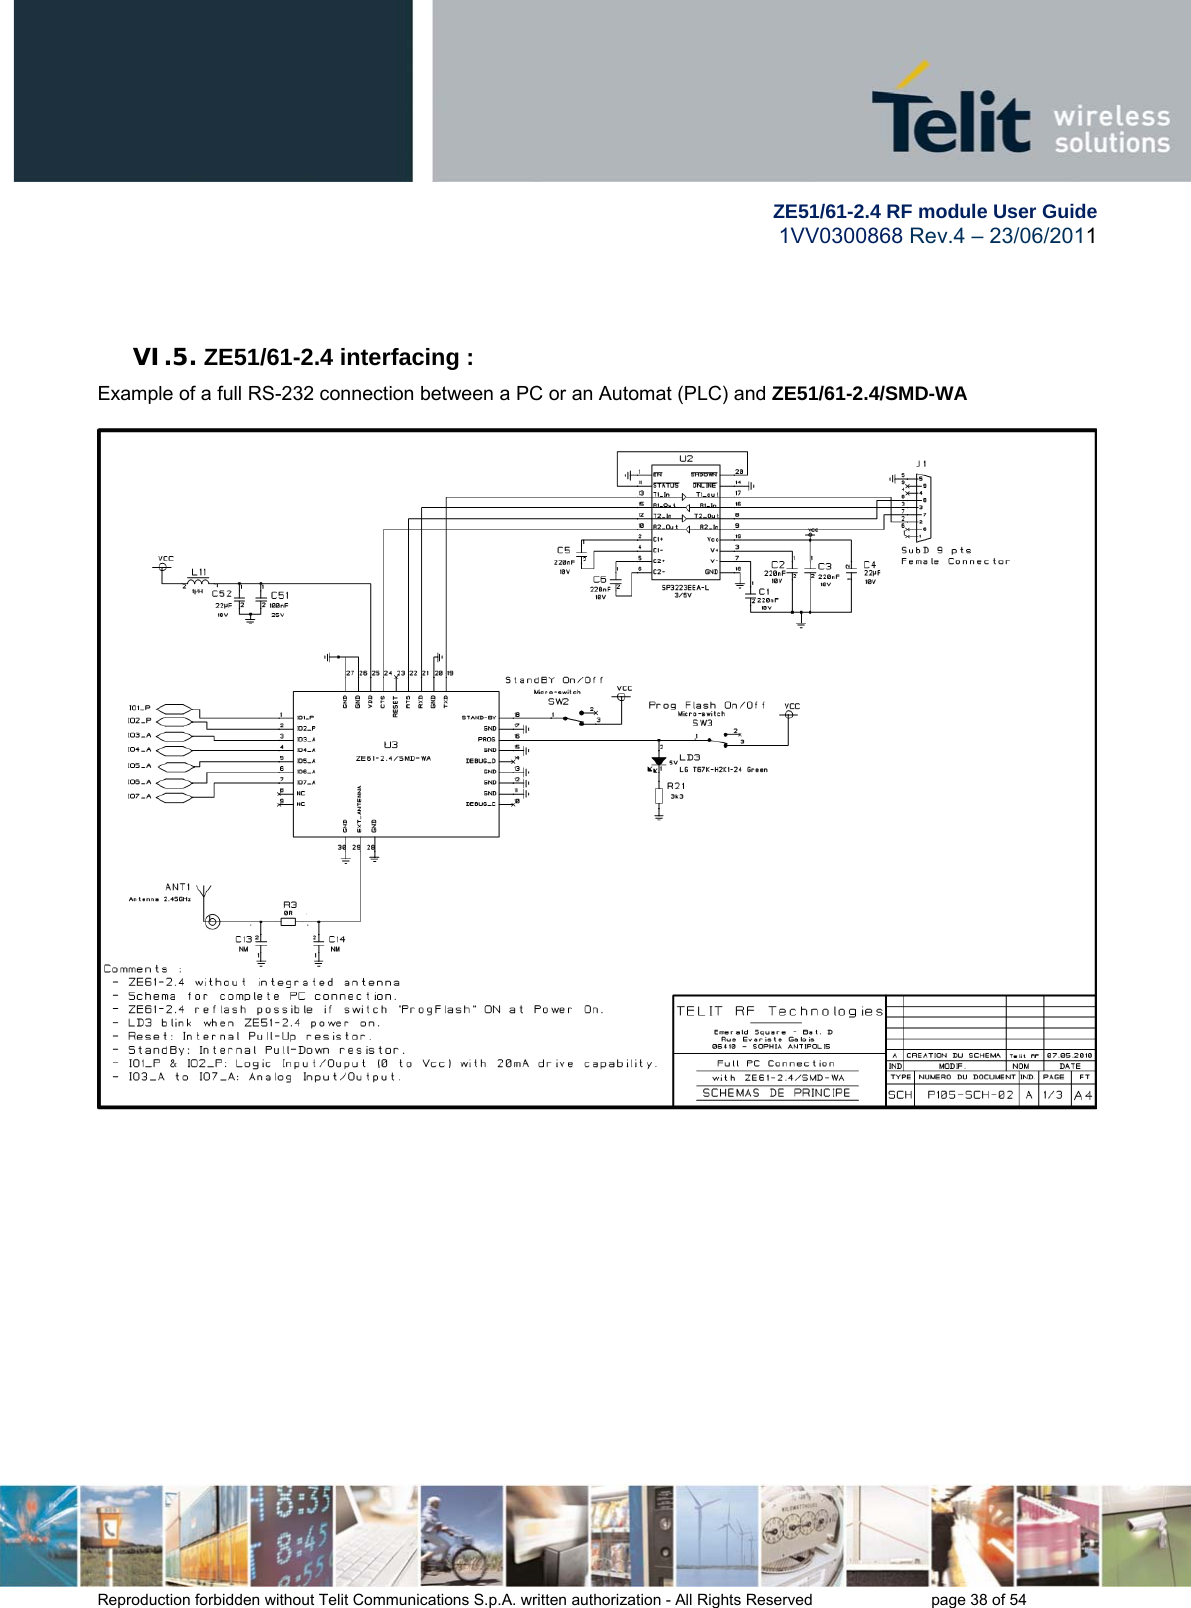         ZE51/61-2.4 RF module User Guide 1VV0300868 Rev.4 – 23/06/2011 Reproduction forbidden without Telit Communications S.p.A. written authorization - All Rights Reserved    page 38 of 54  VI.5. ZE51/61-2.4 interfacing : Example of a full RS-232 connection between a PC or an Automat (PLC) and ZE51/61-2.4/SMD-WA   